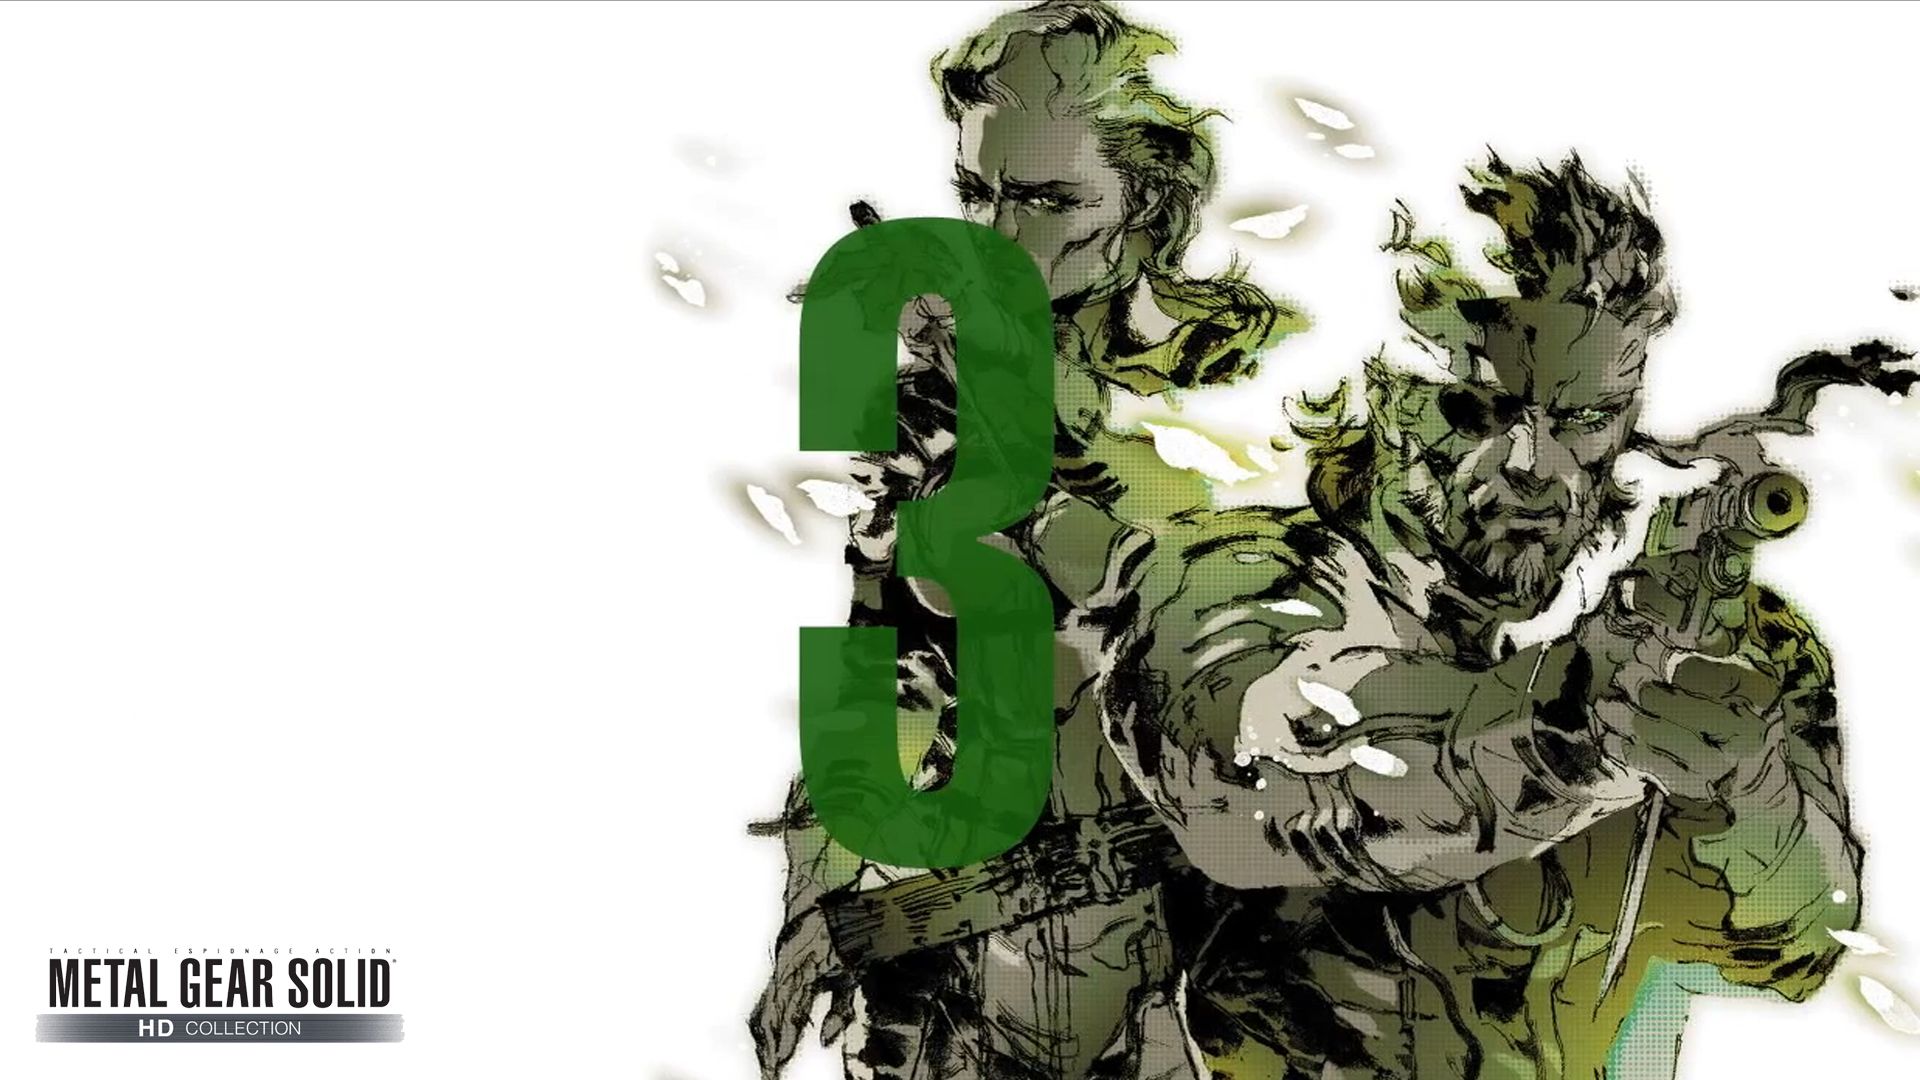 Metal Gear Solid HD COLLECTION Unique MGS3 by Outer Heaven1974